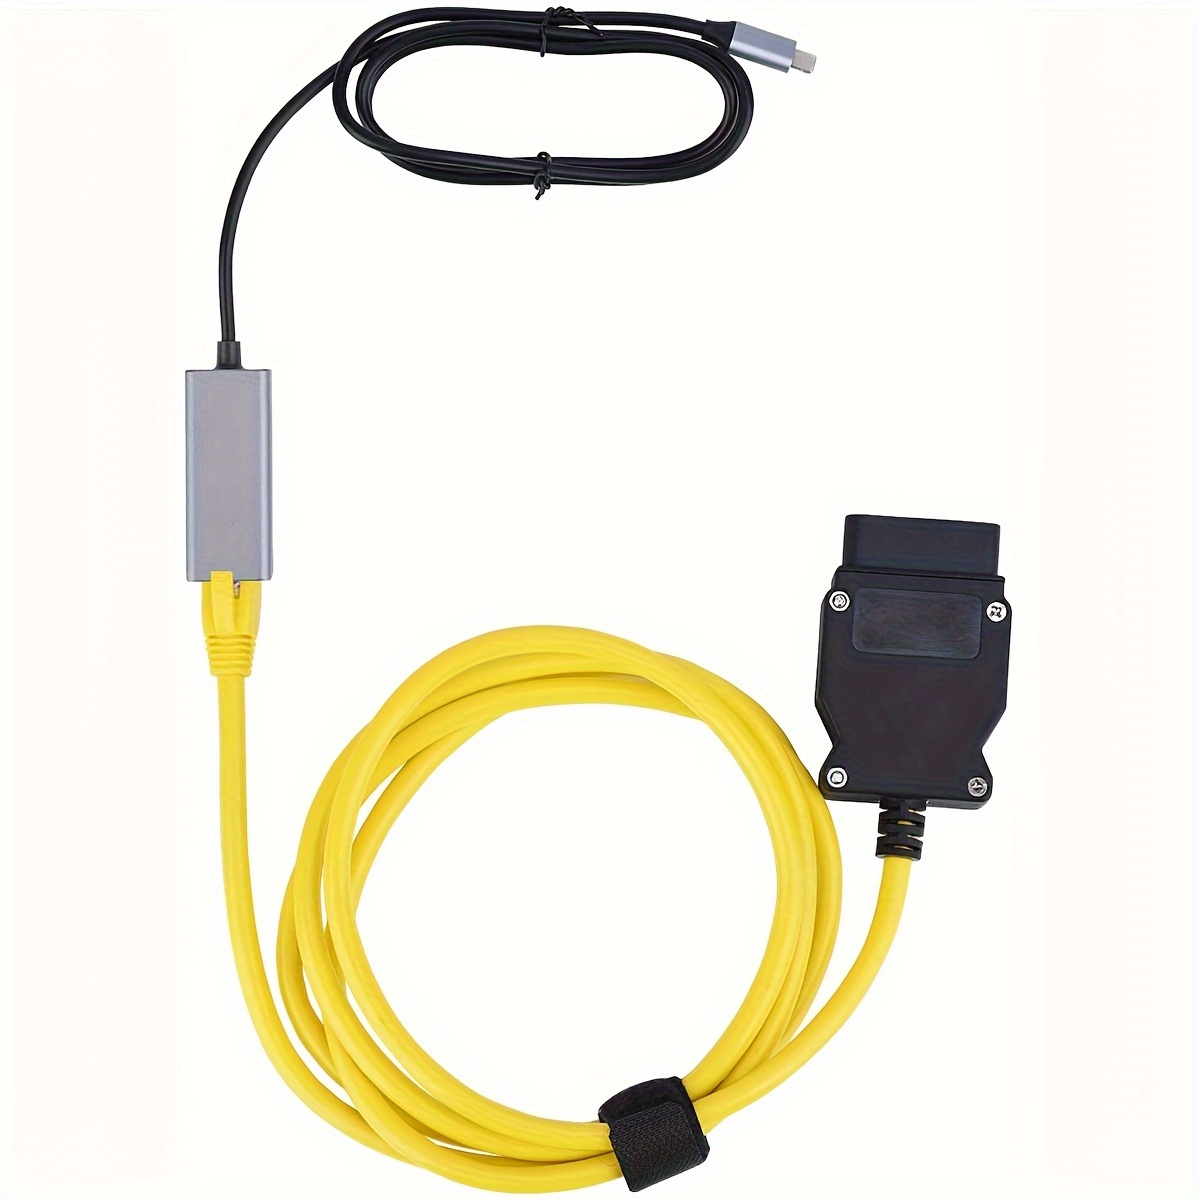 OBD2 ENET cable for BMW F-series ICOM OBD2 Coding Diagnostic Cable Ethernet  to Data OBDII Coding Hidden Data Tool